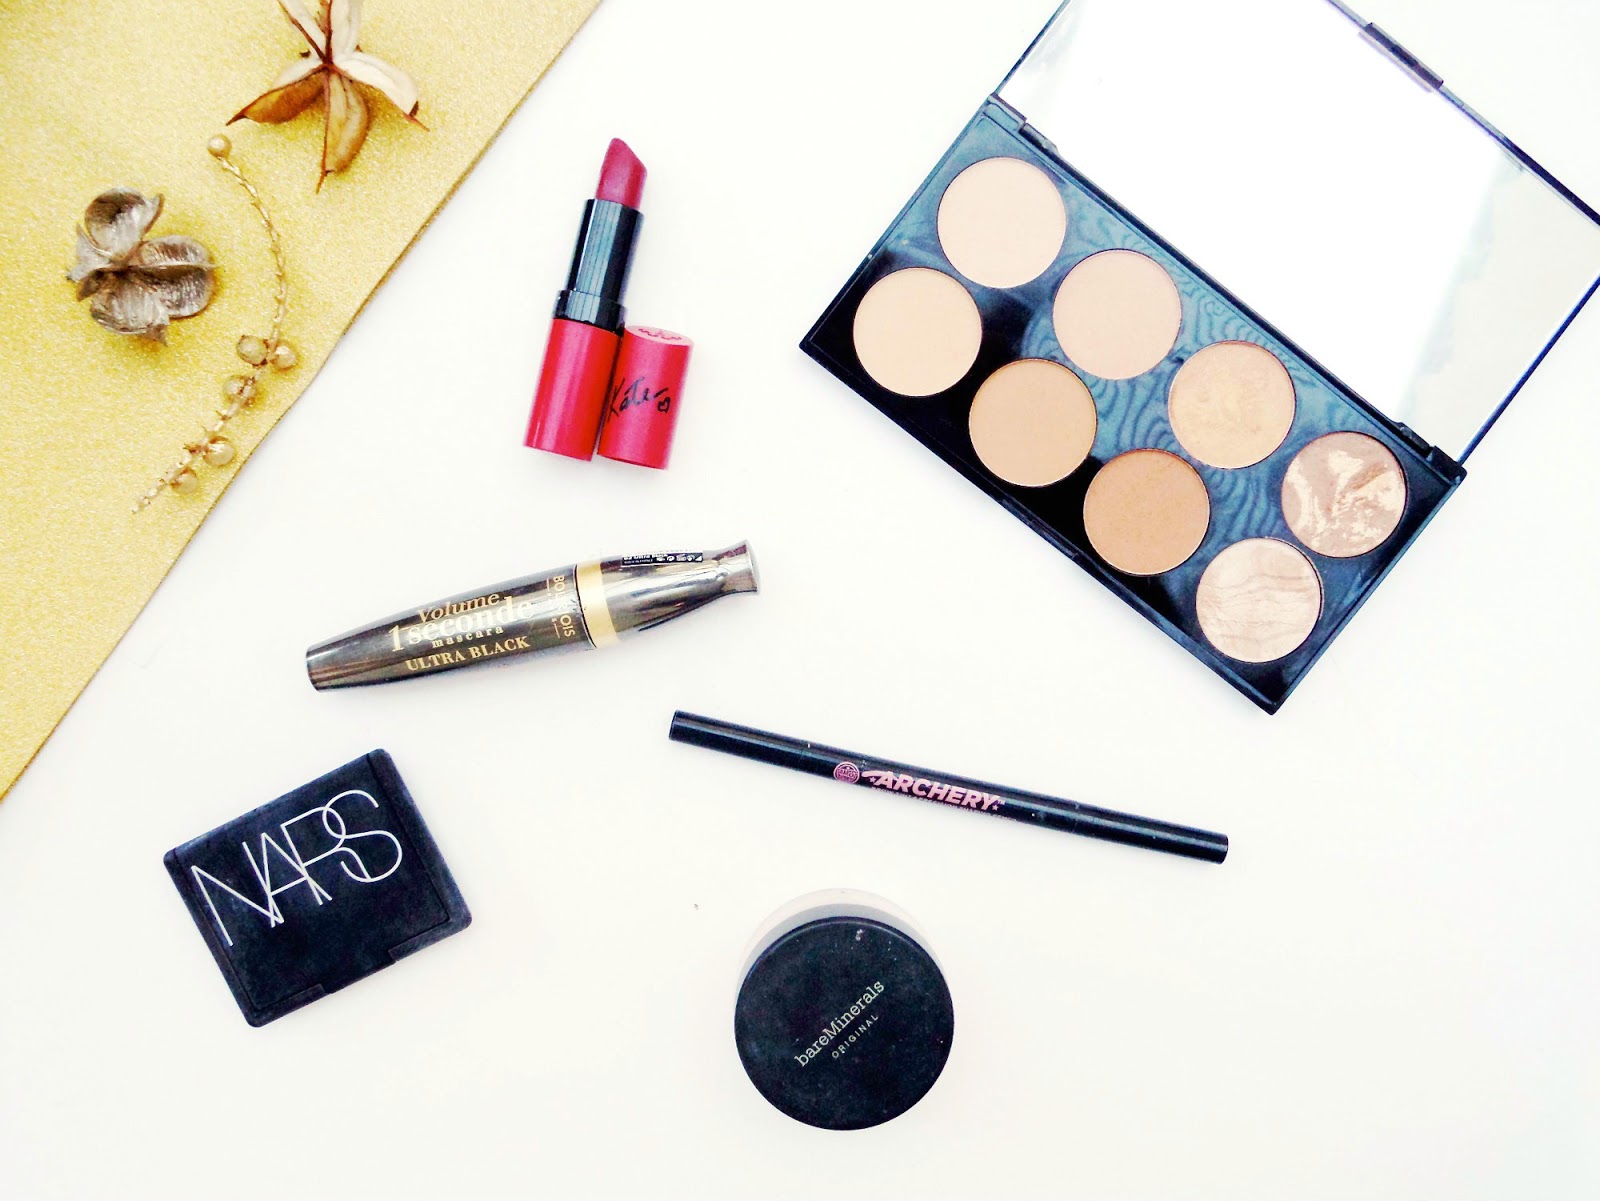 My Top Beauty Products of 2014